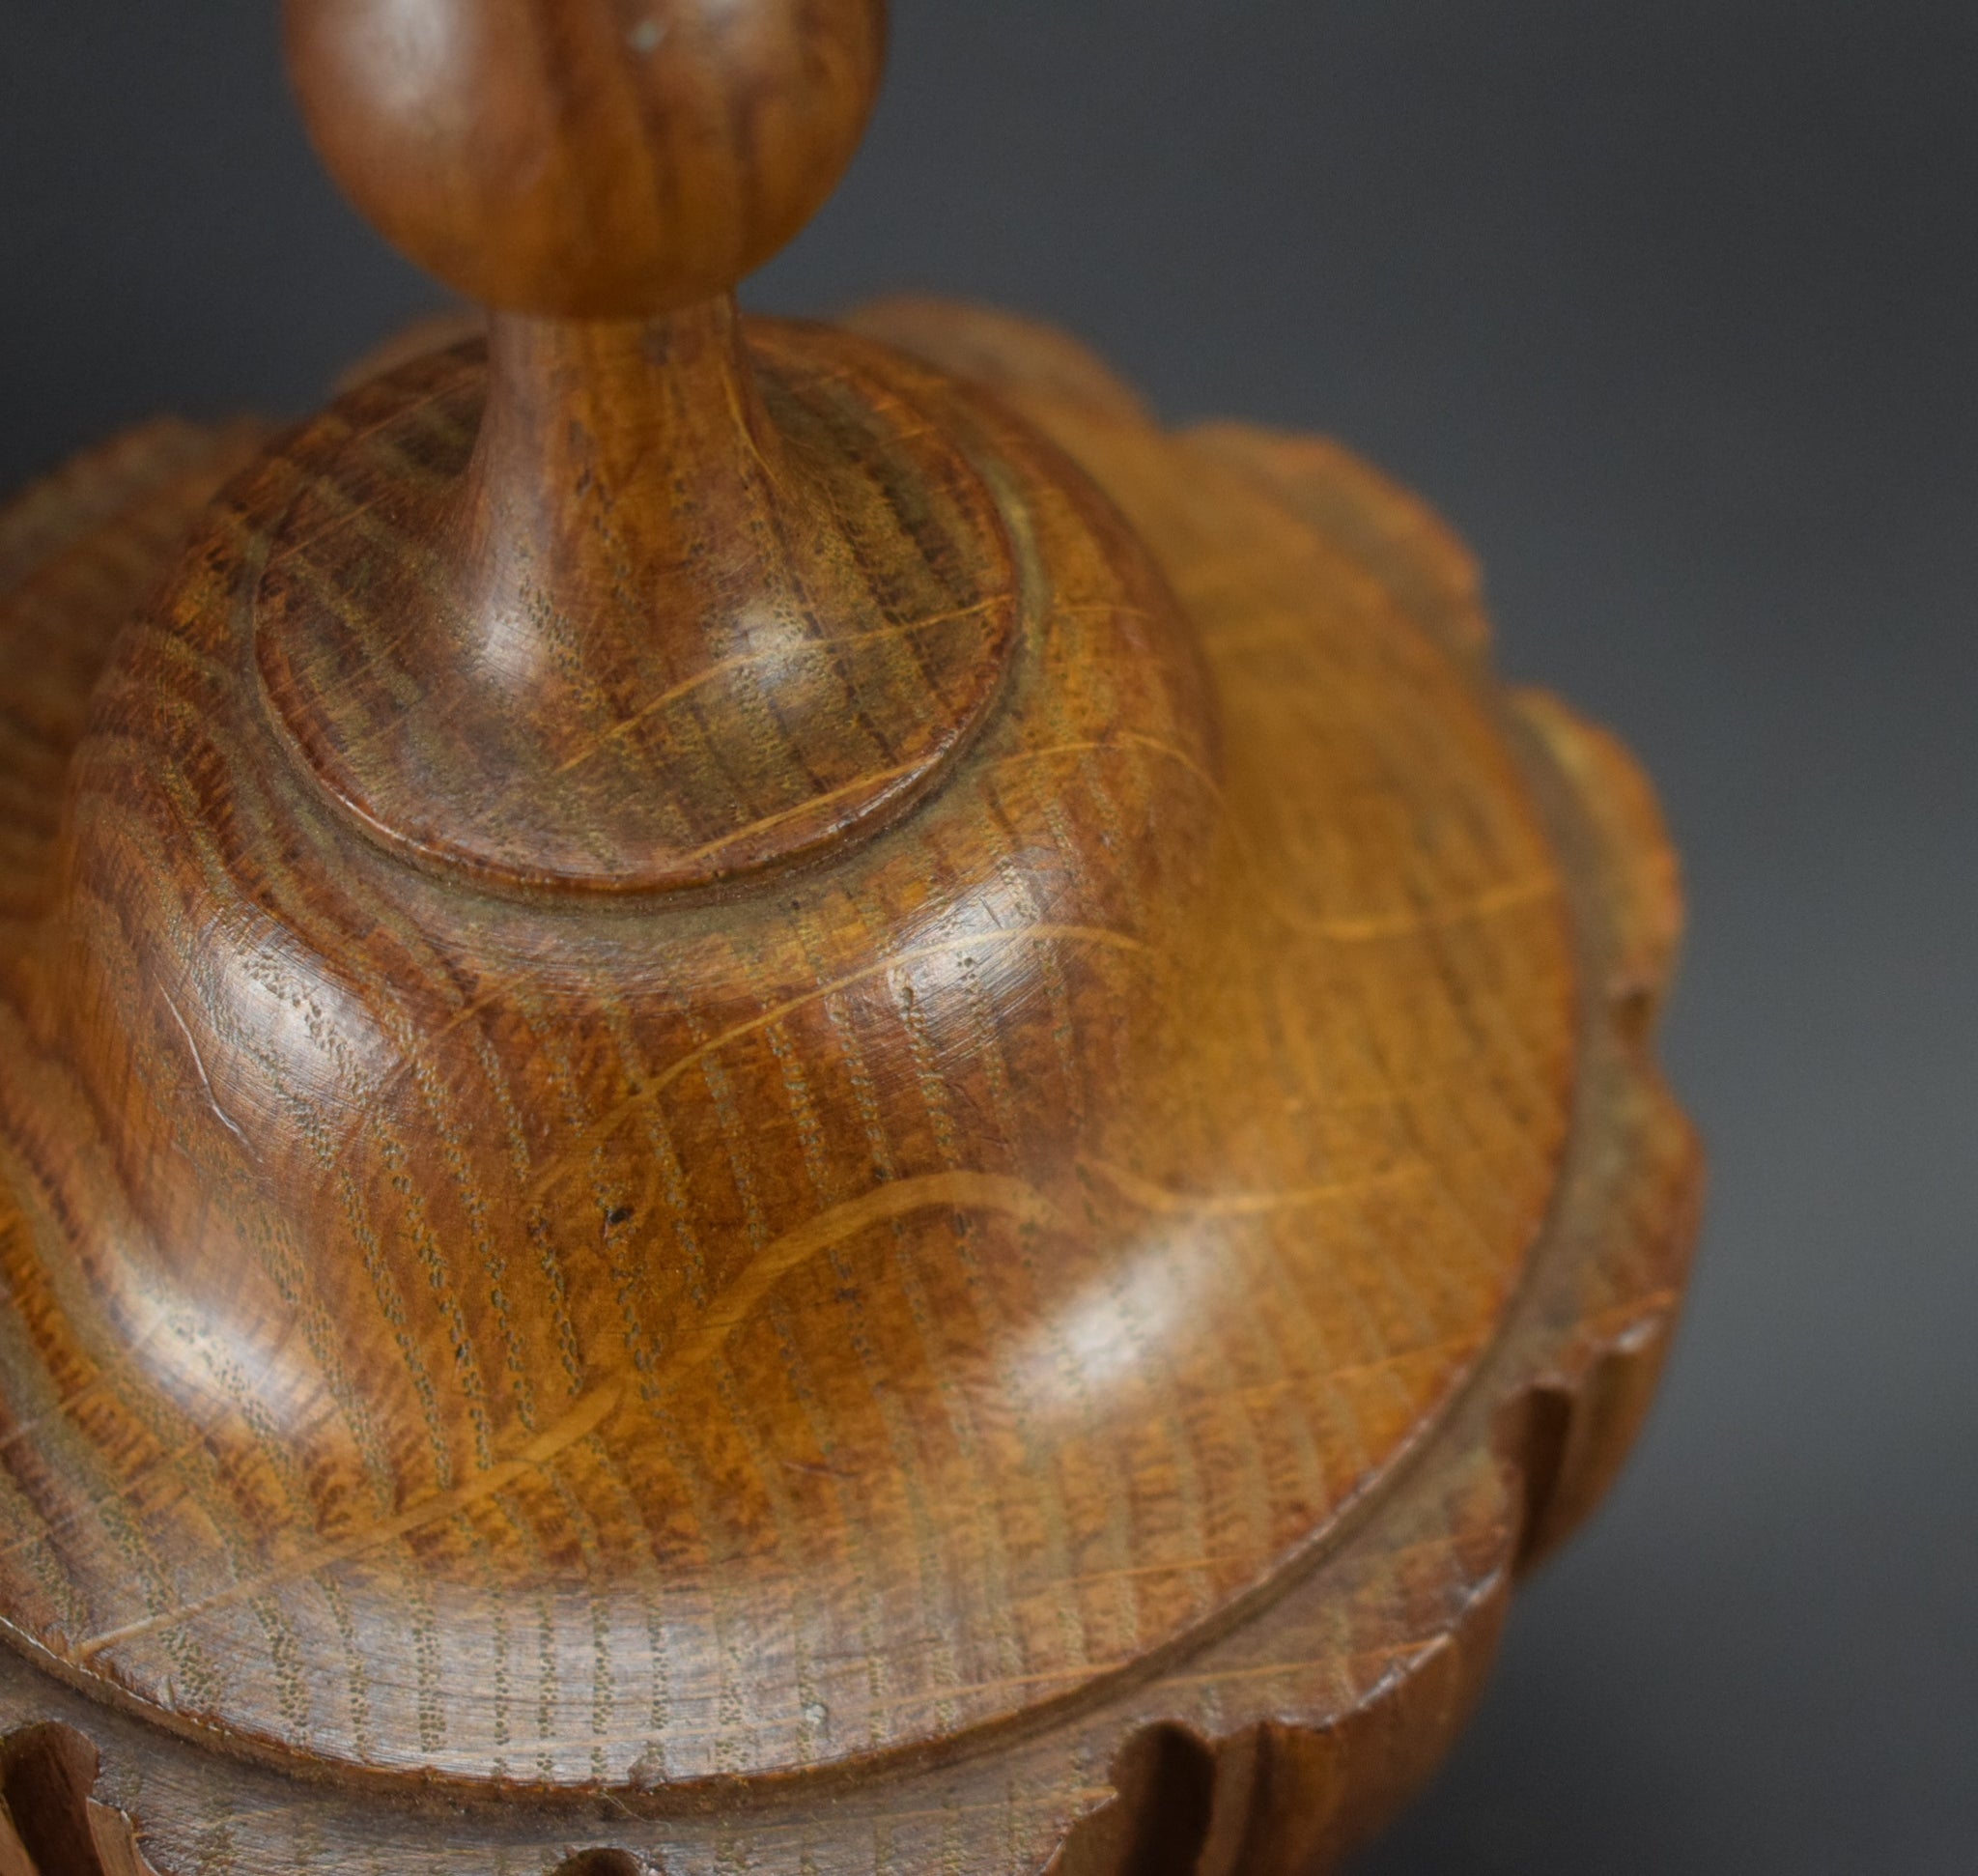 Wood Stairwell Finial - Charmantiques